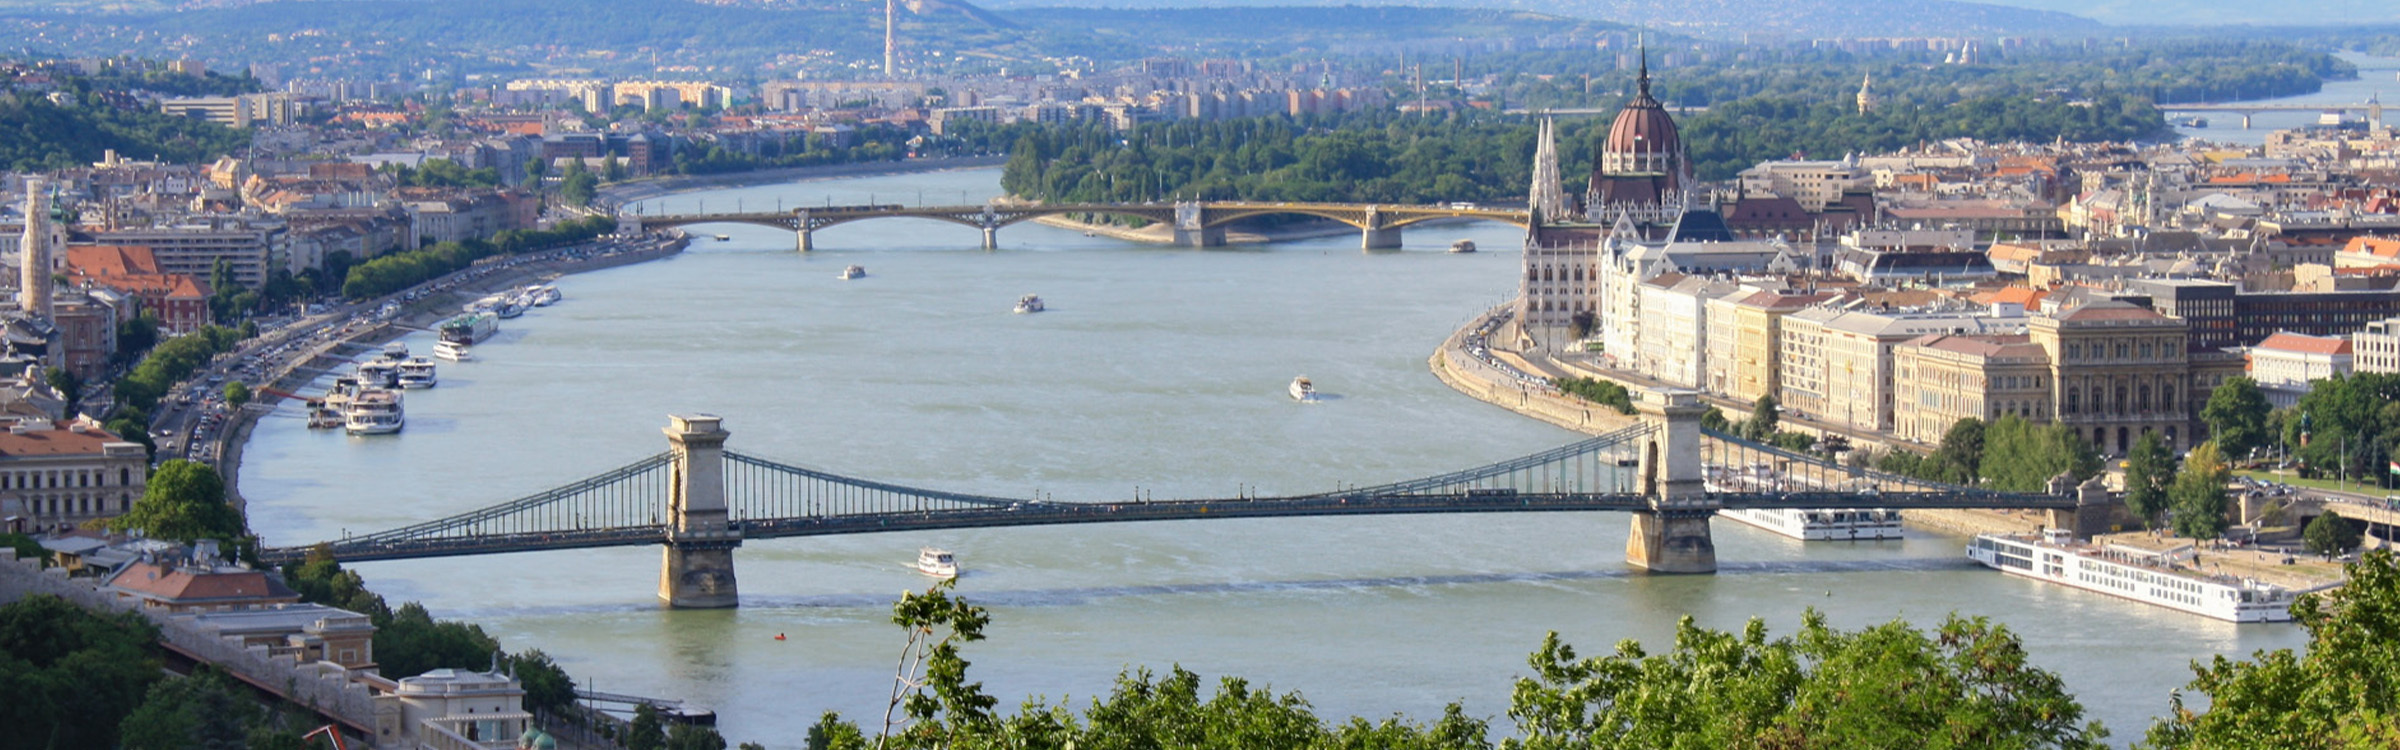 The chain bridge spans the Danube between Buda (left) and Pest (right)